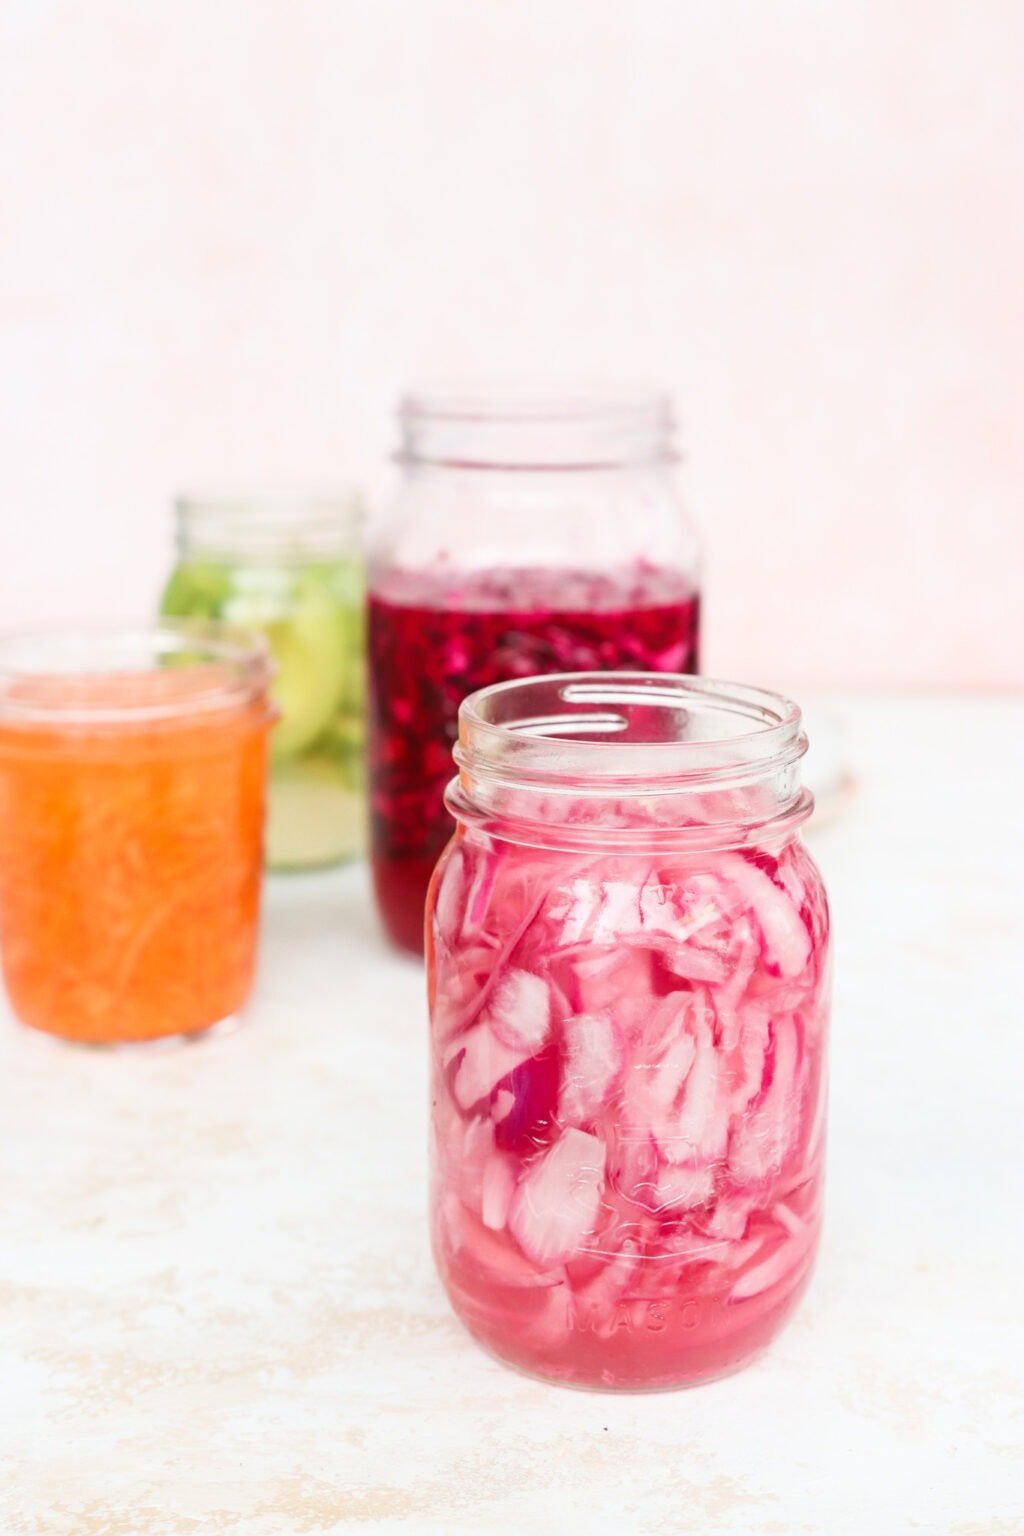 Quick pickled shredded carrots, red cabbage, avocados, and red onion in glass jars